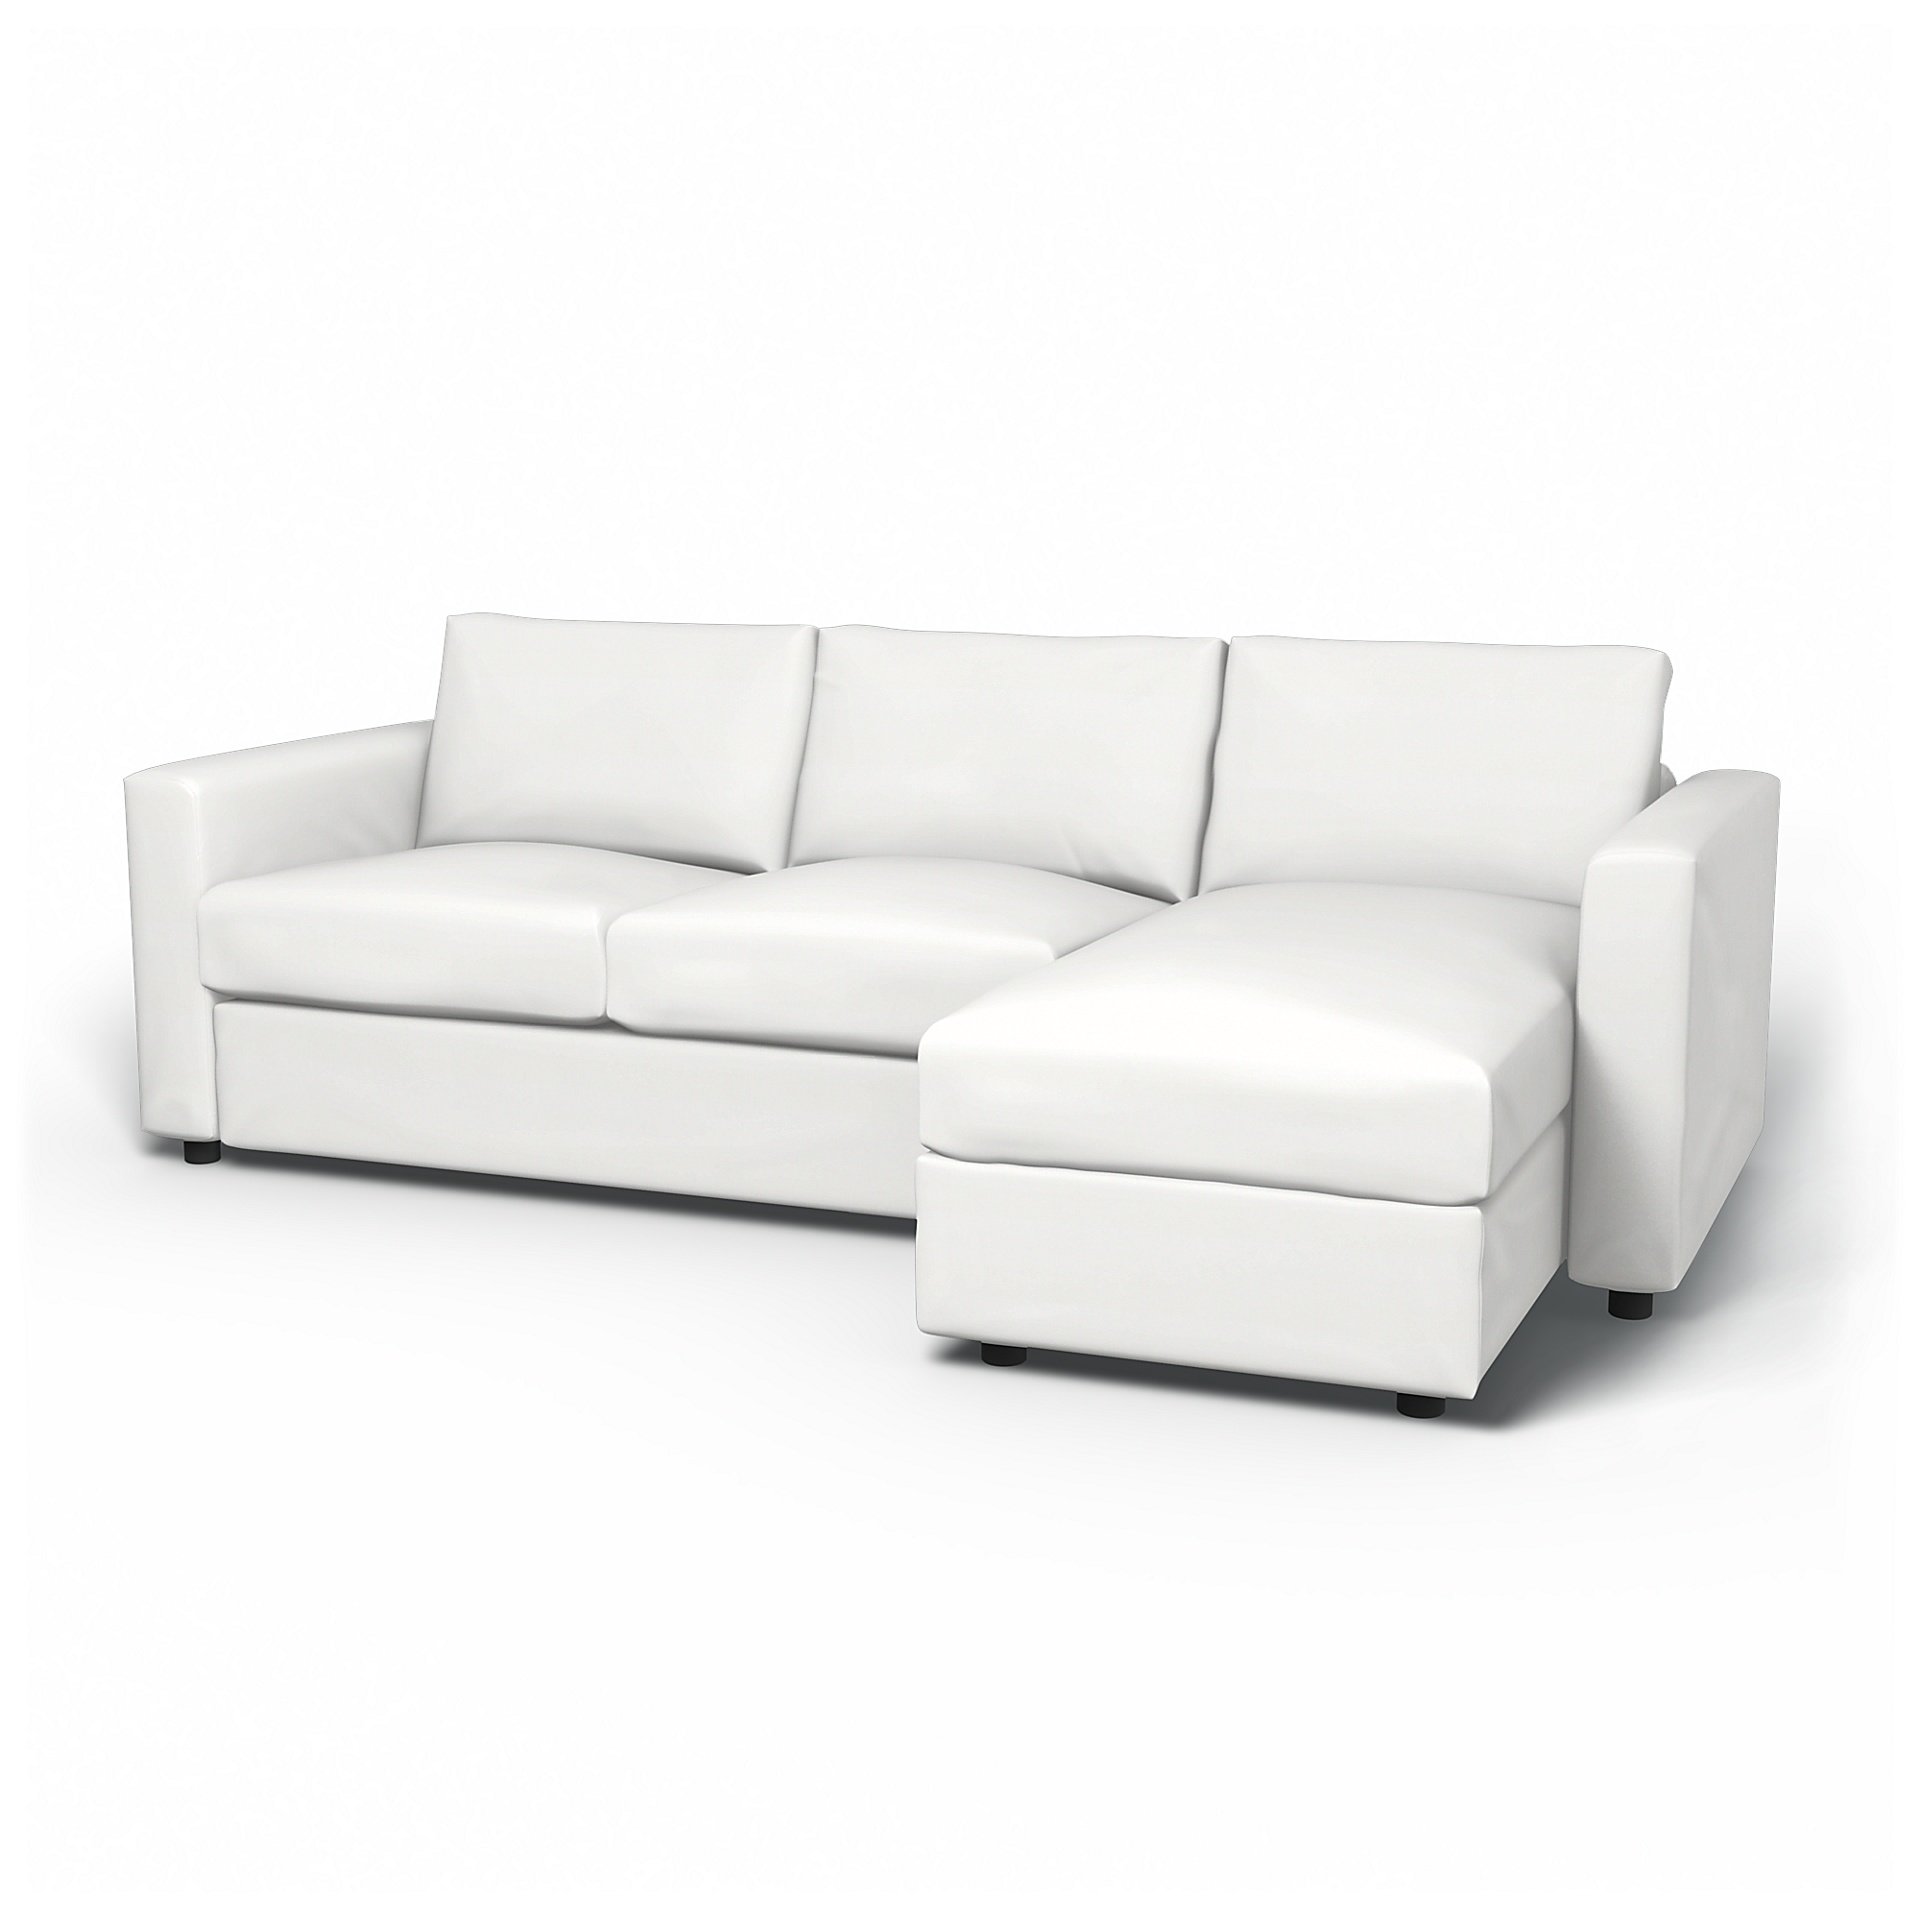 IKEA - Vimle 2 Seater Sofa with Chaise Cover, Absolute White, Linen - Bemz